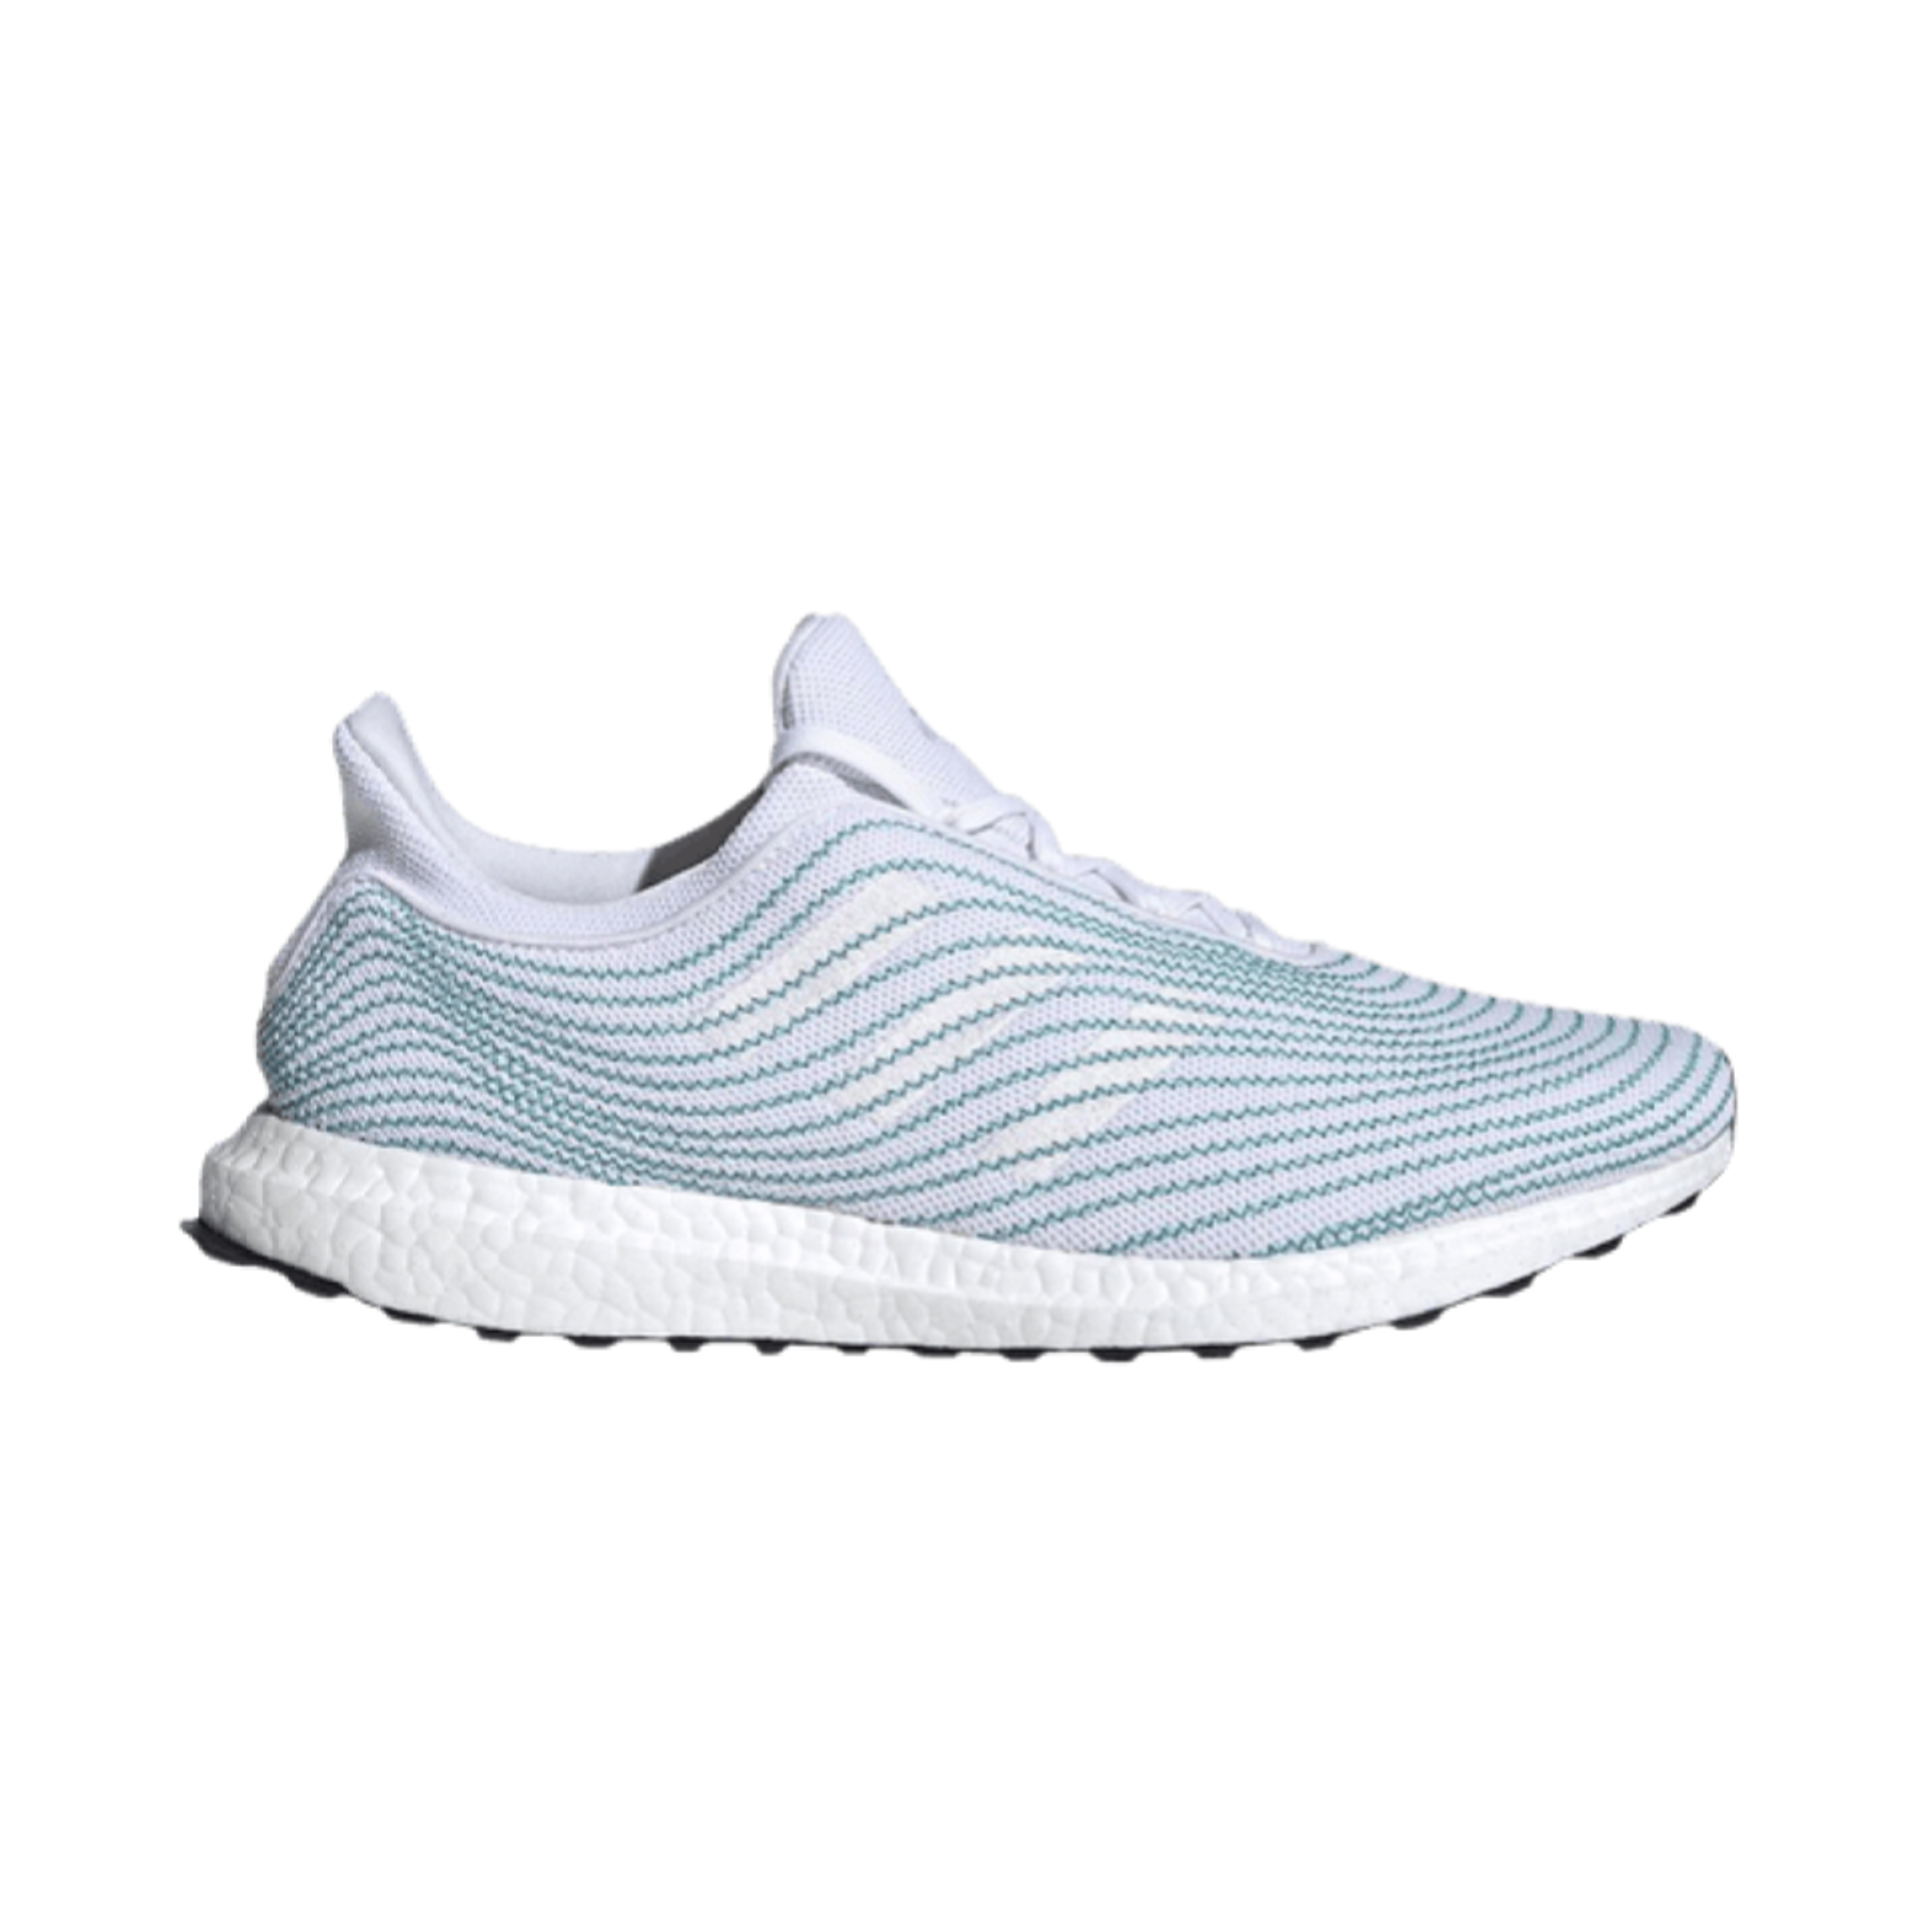 Parley x UltraBoost DNA 'Cloud White'